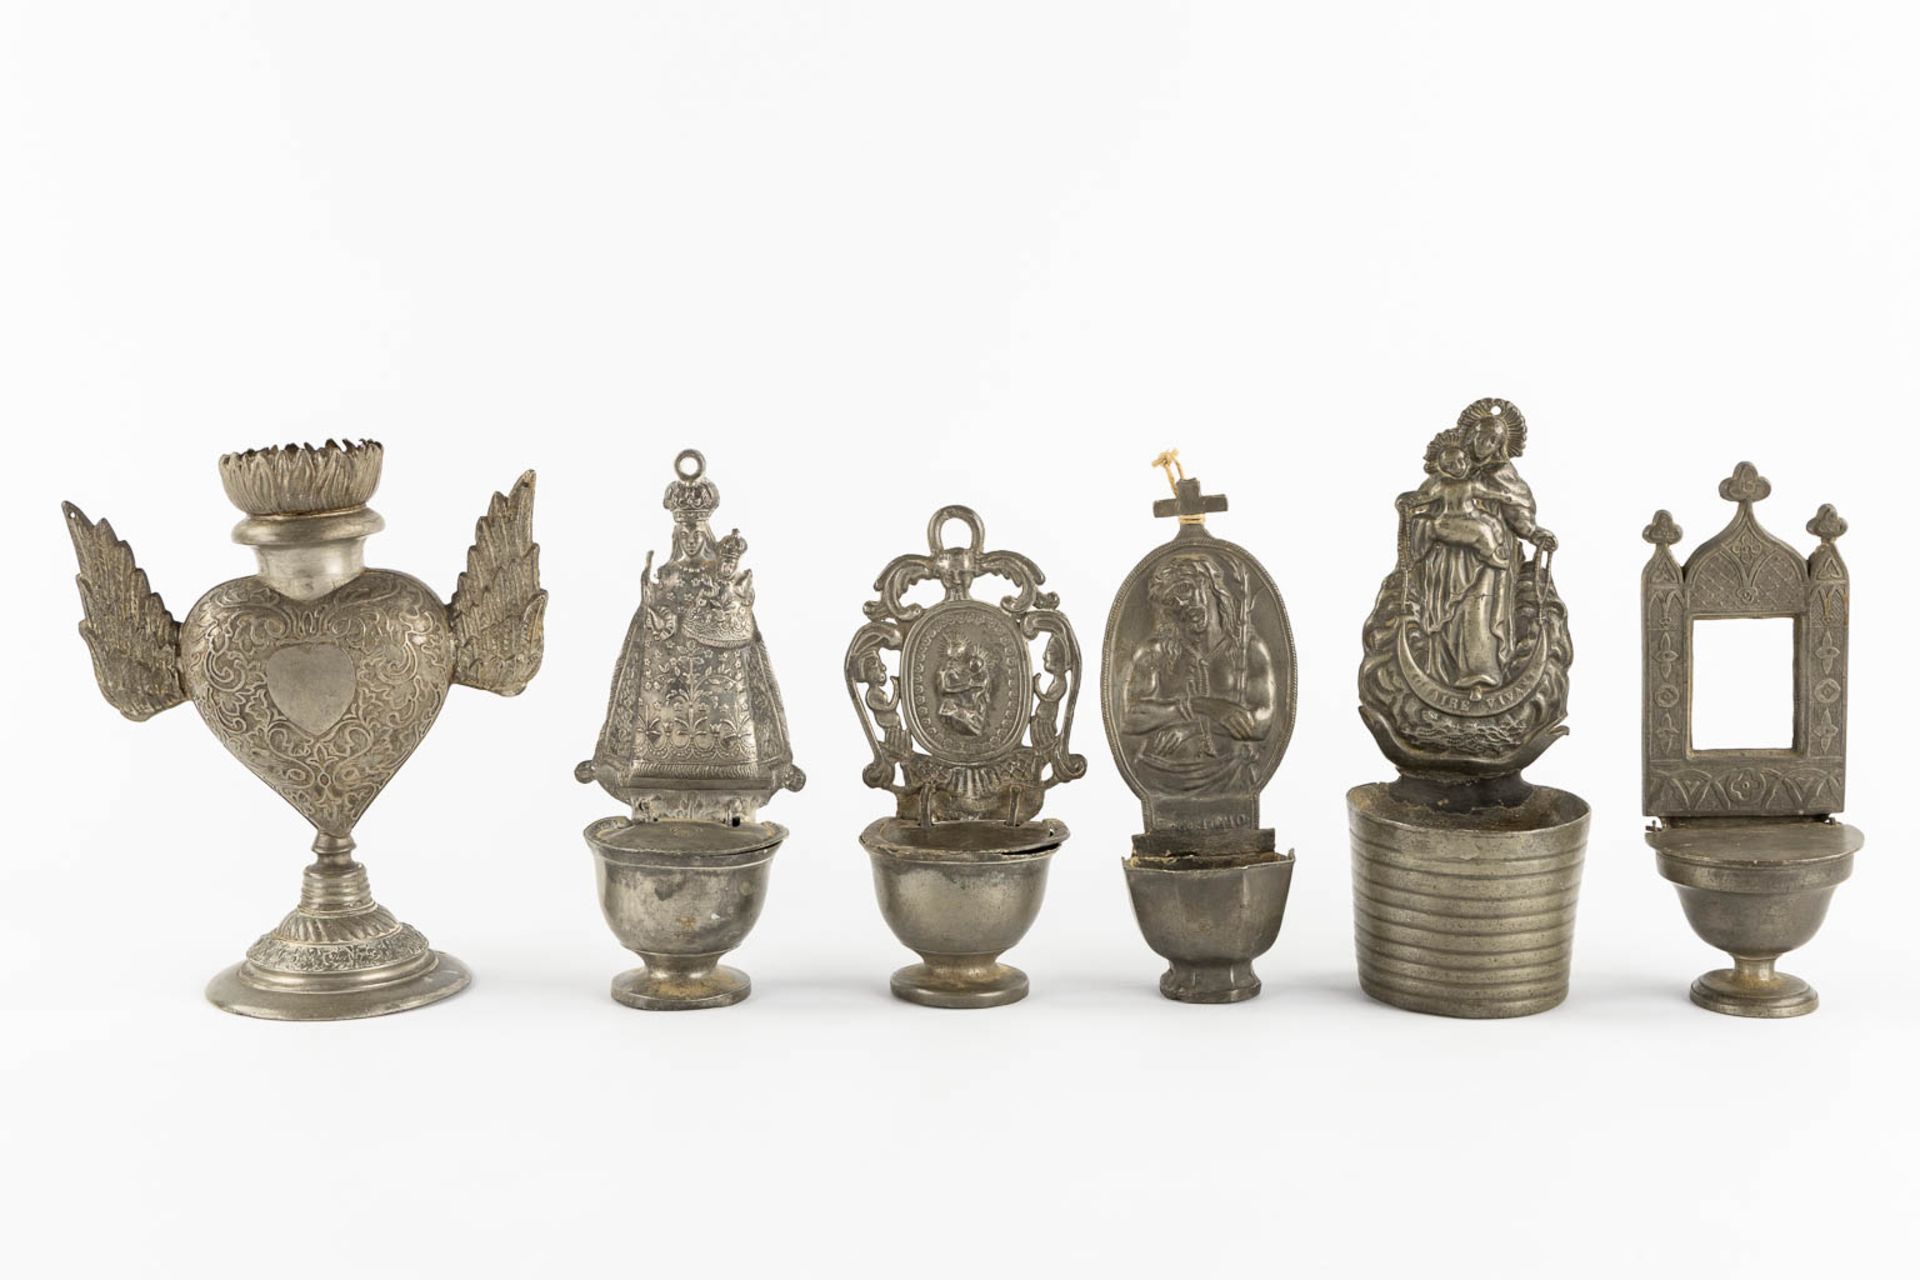 20 pieces of holy water fonts and a crucifix. Pewter, glass, Tin and Copper. 18th and 19th C. (W:17, - Bild 7 aus 10